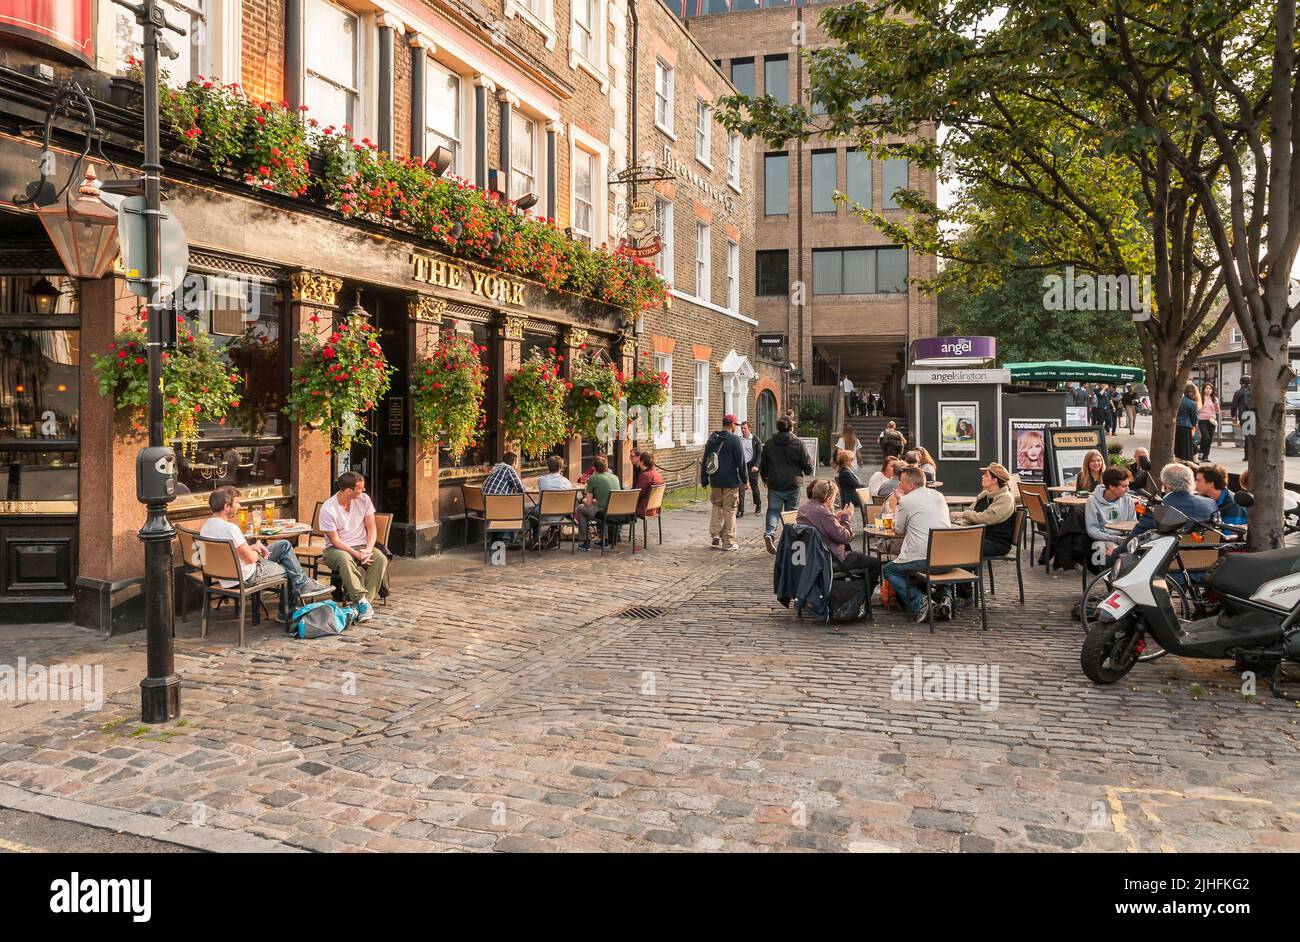 London, United Kingdom - September 13, 2013: The York - Traditional British outdoor pub. Famous for cows that once grazed right up to the back door. Stock Photo